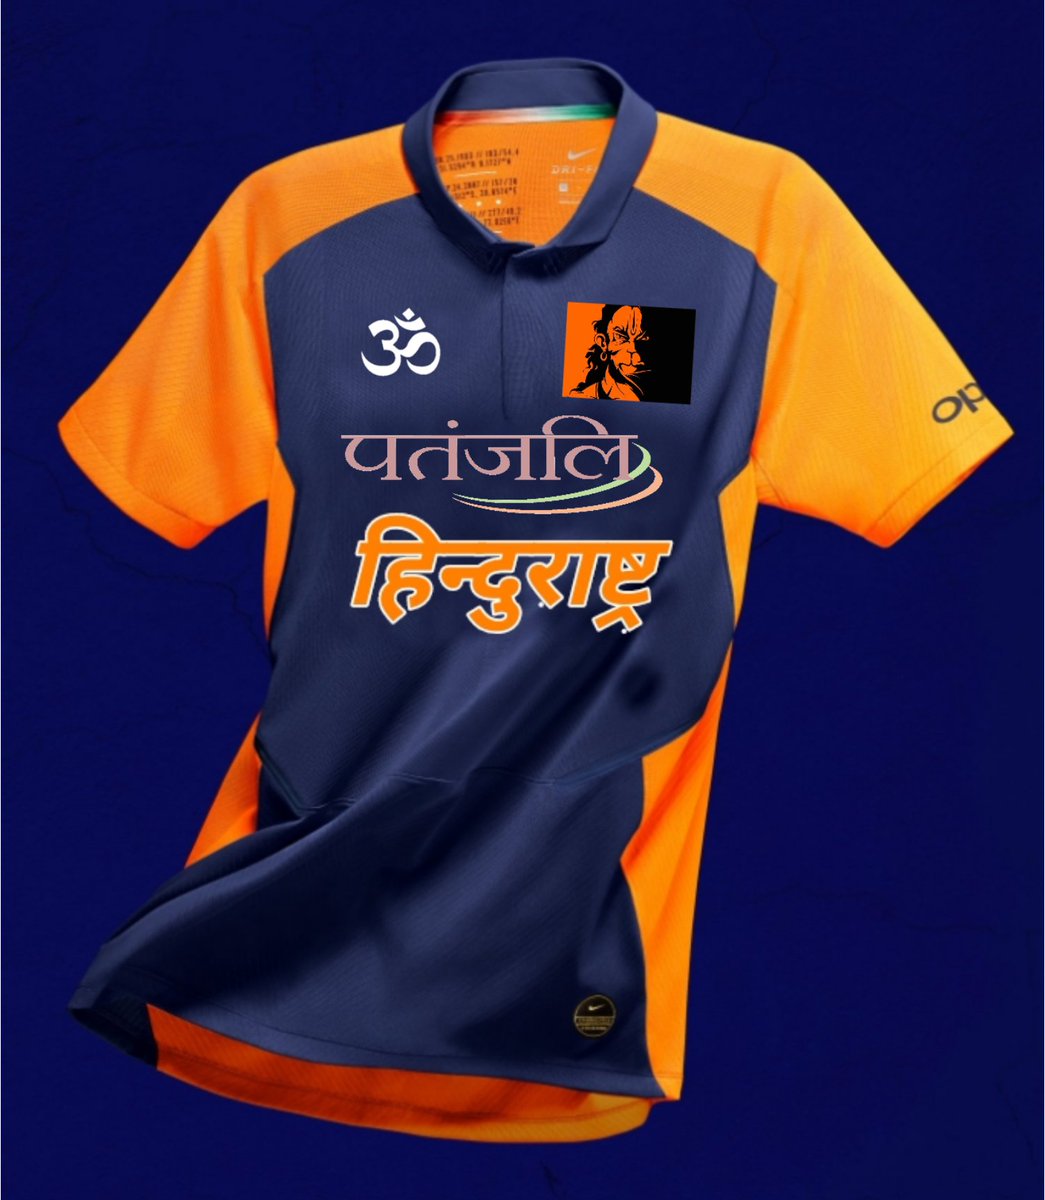 New away Jersey for #TeamIndia

1. How it actually is
2. How liberals see it
 #CWC19 #BleedOrange